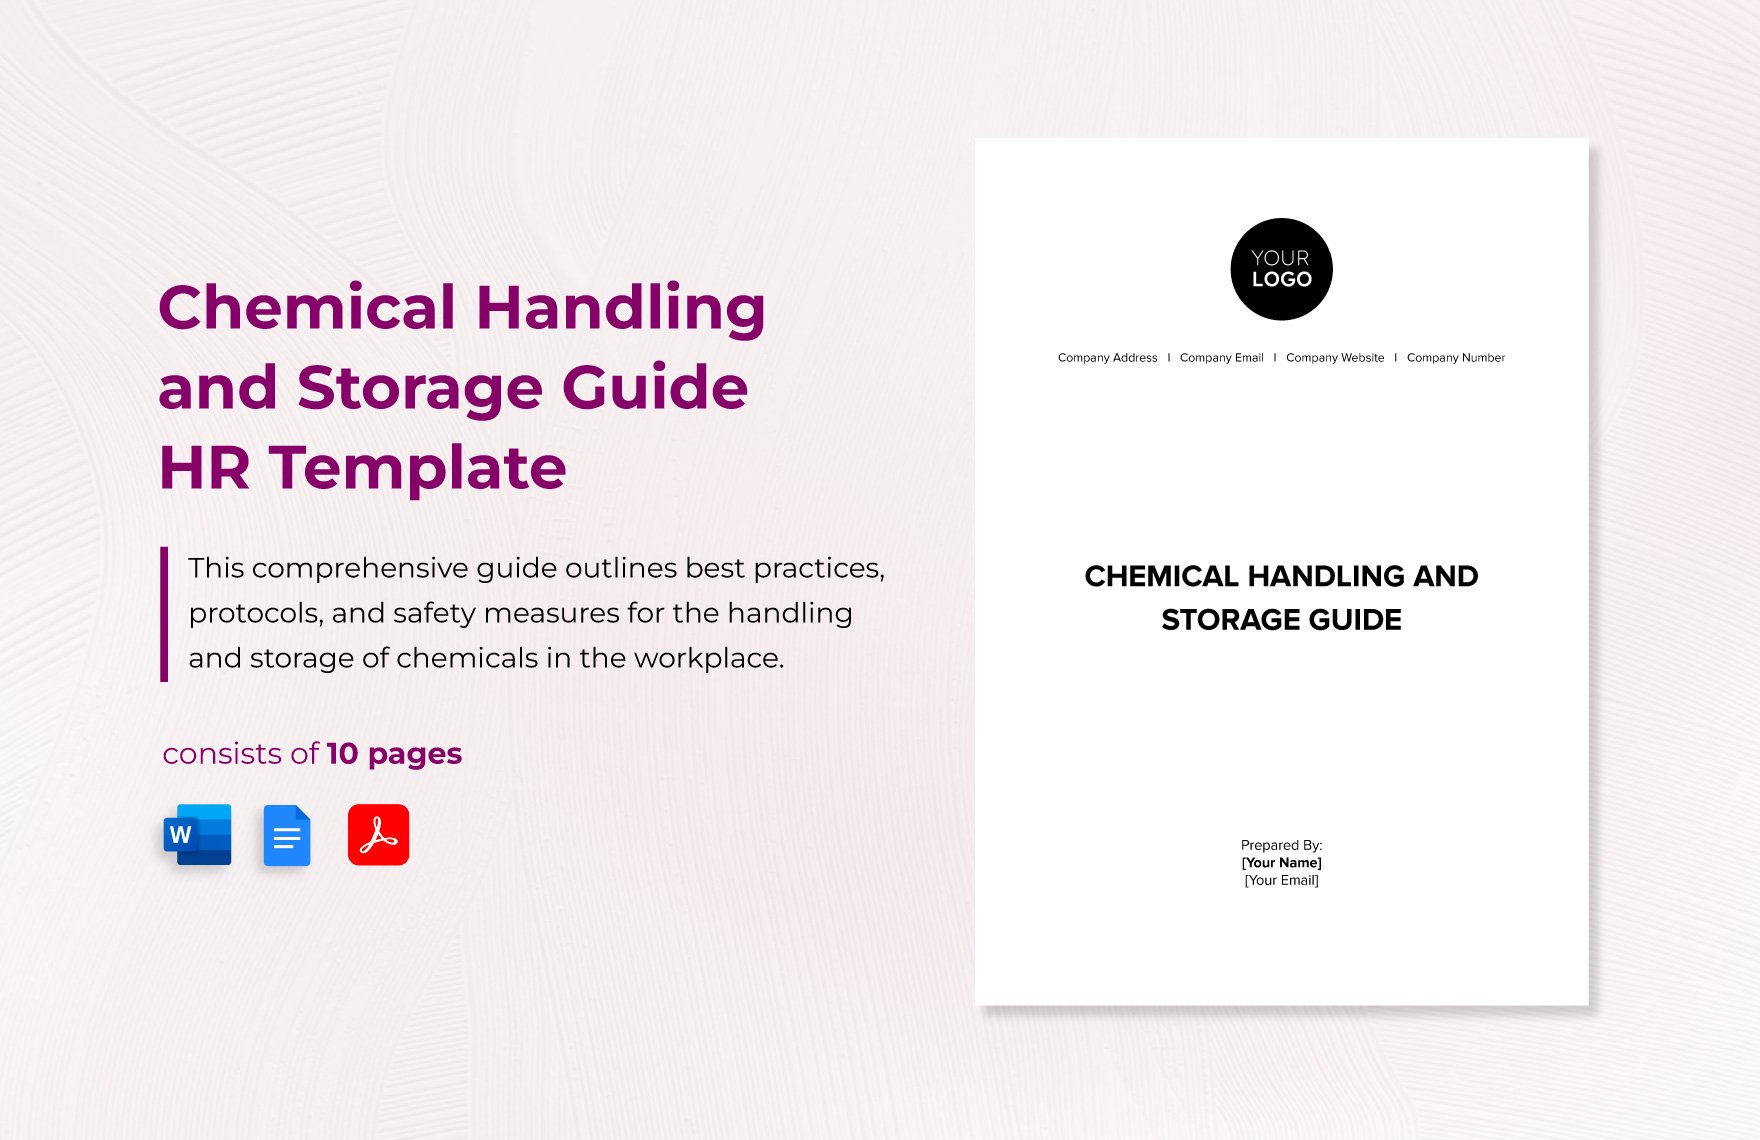 Chemical Handling and Storage Guide HR Template